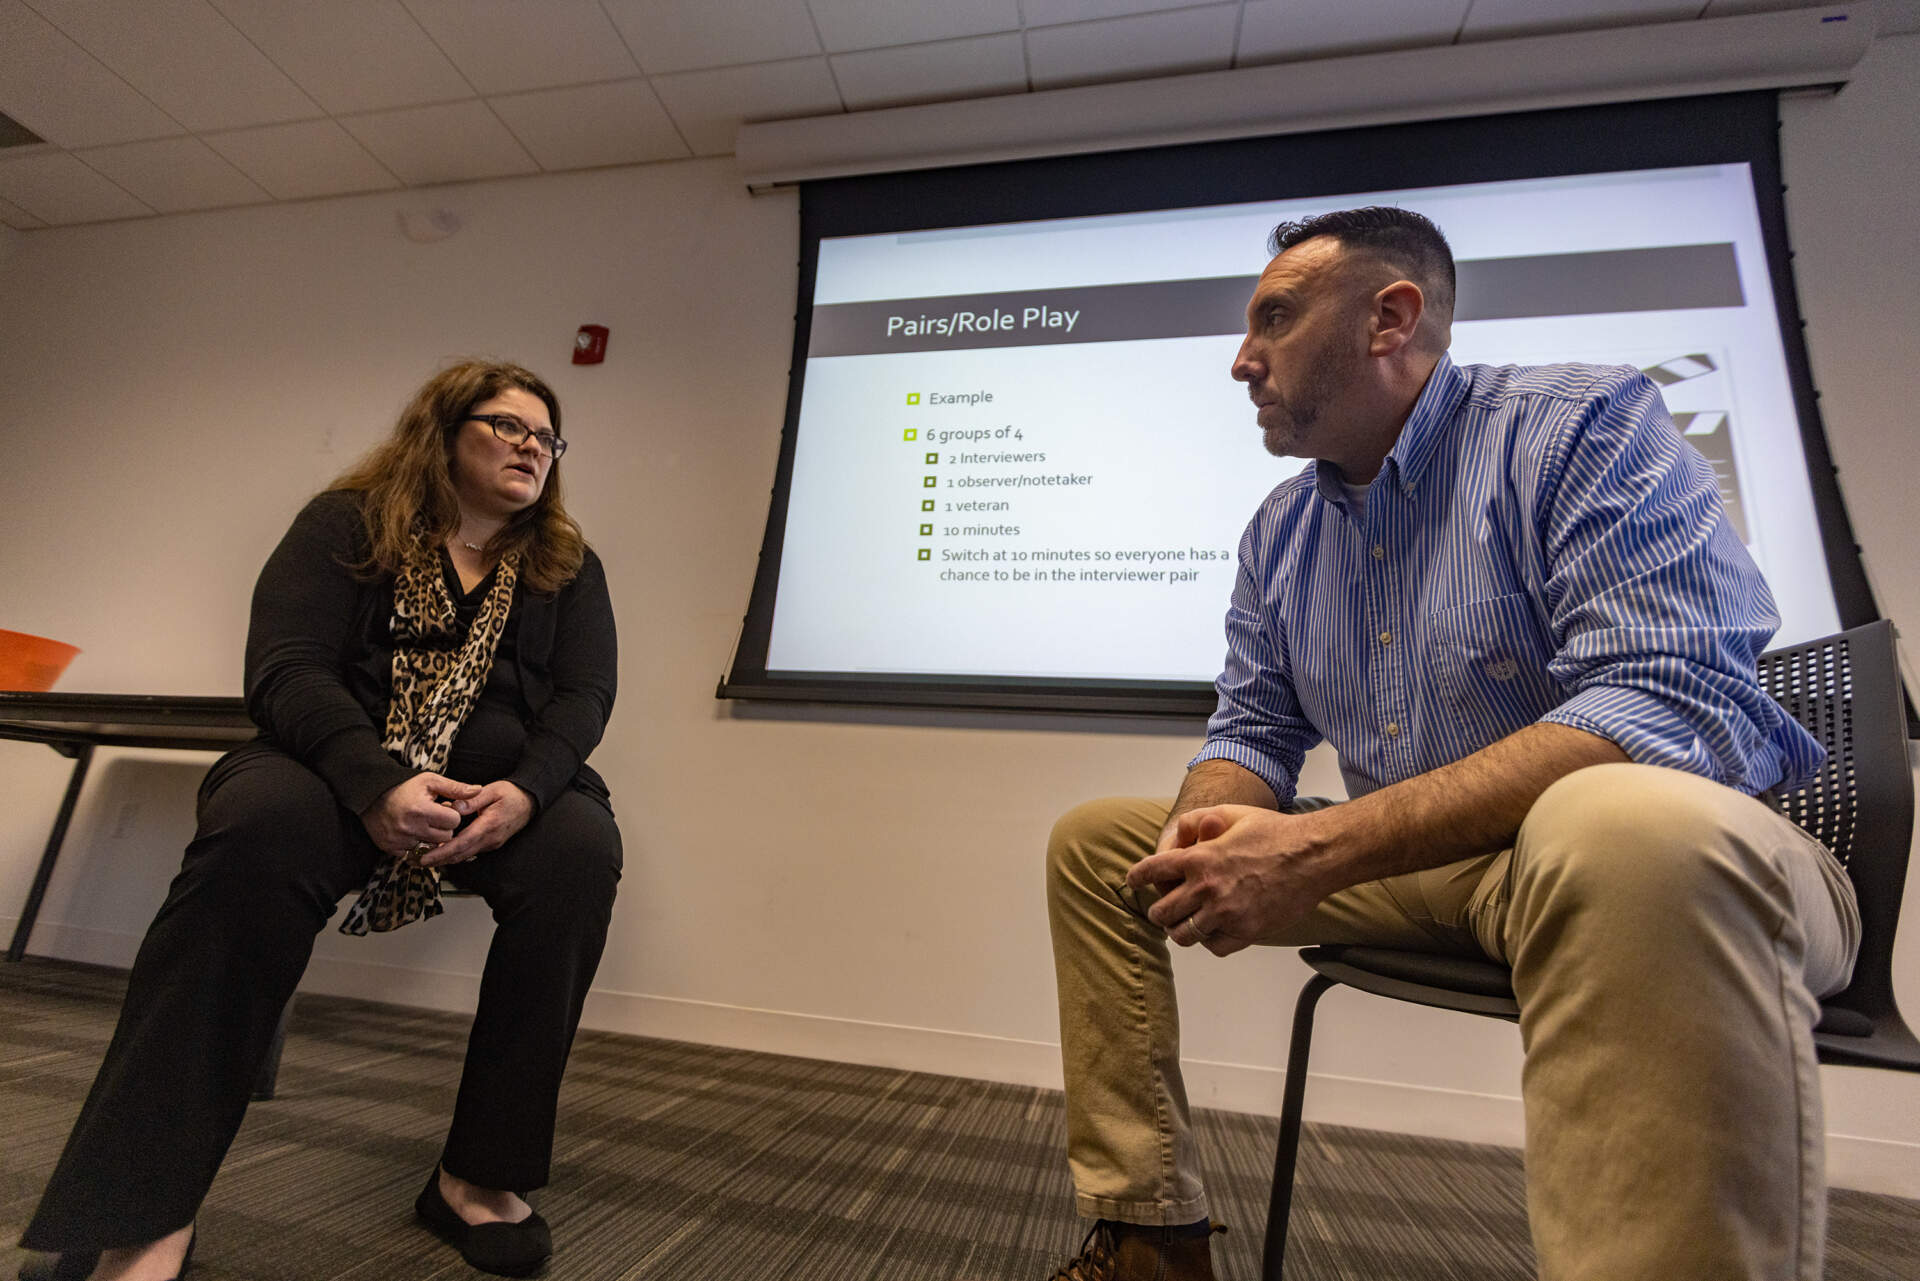 Jenny D’Olympia and Framingham police sergeant and Army veteran Jay Ball, also an instructor in the program, role-play as a therapist and veteran talking about safer gun storage. (Jesse Costa/WBUR)